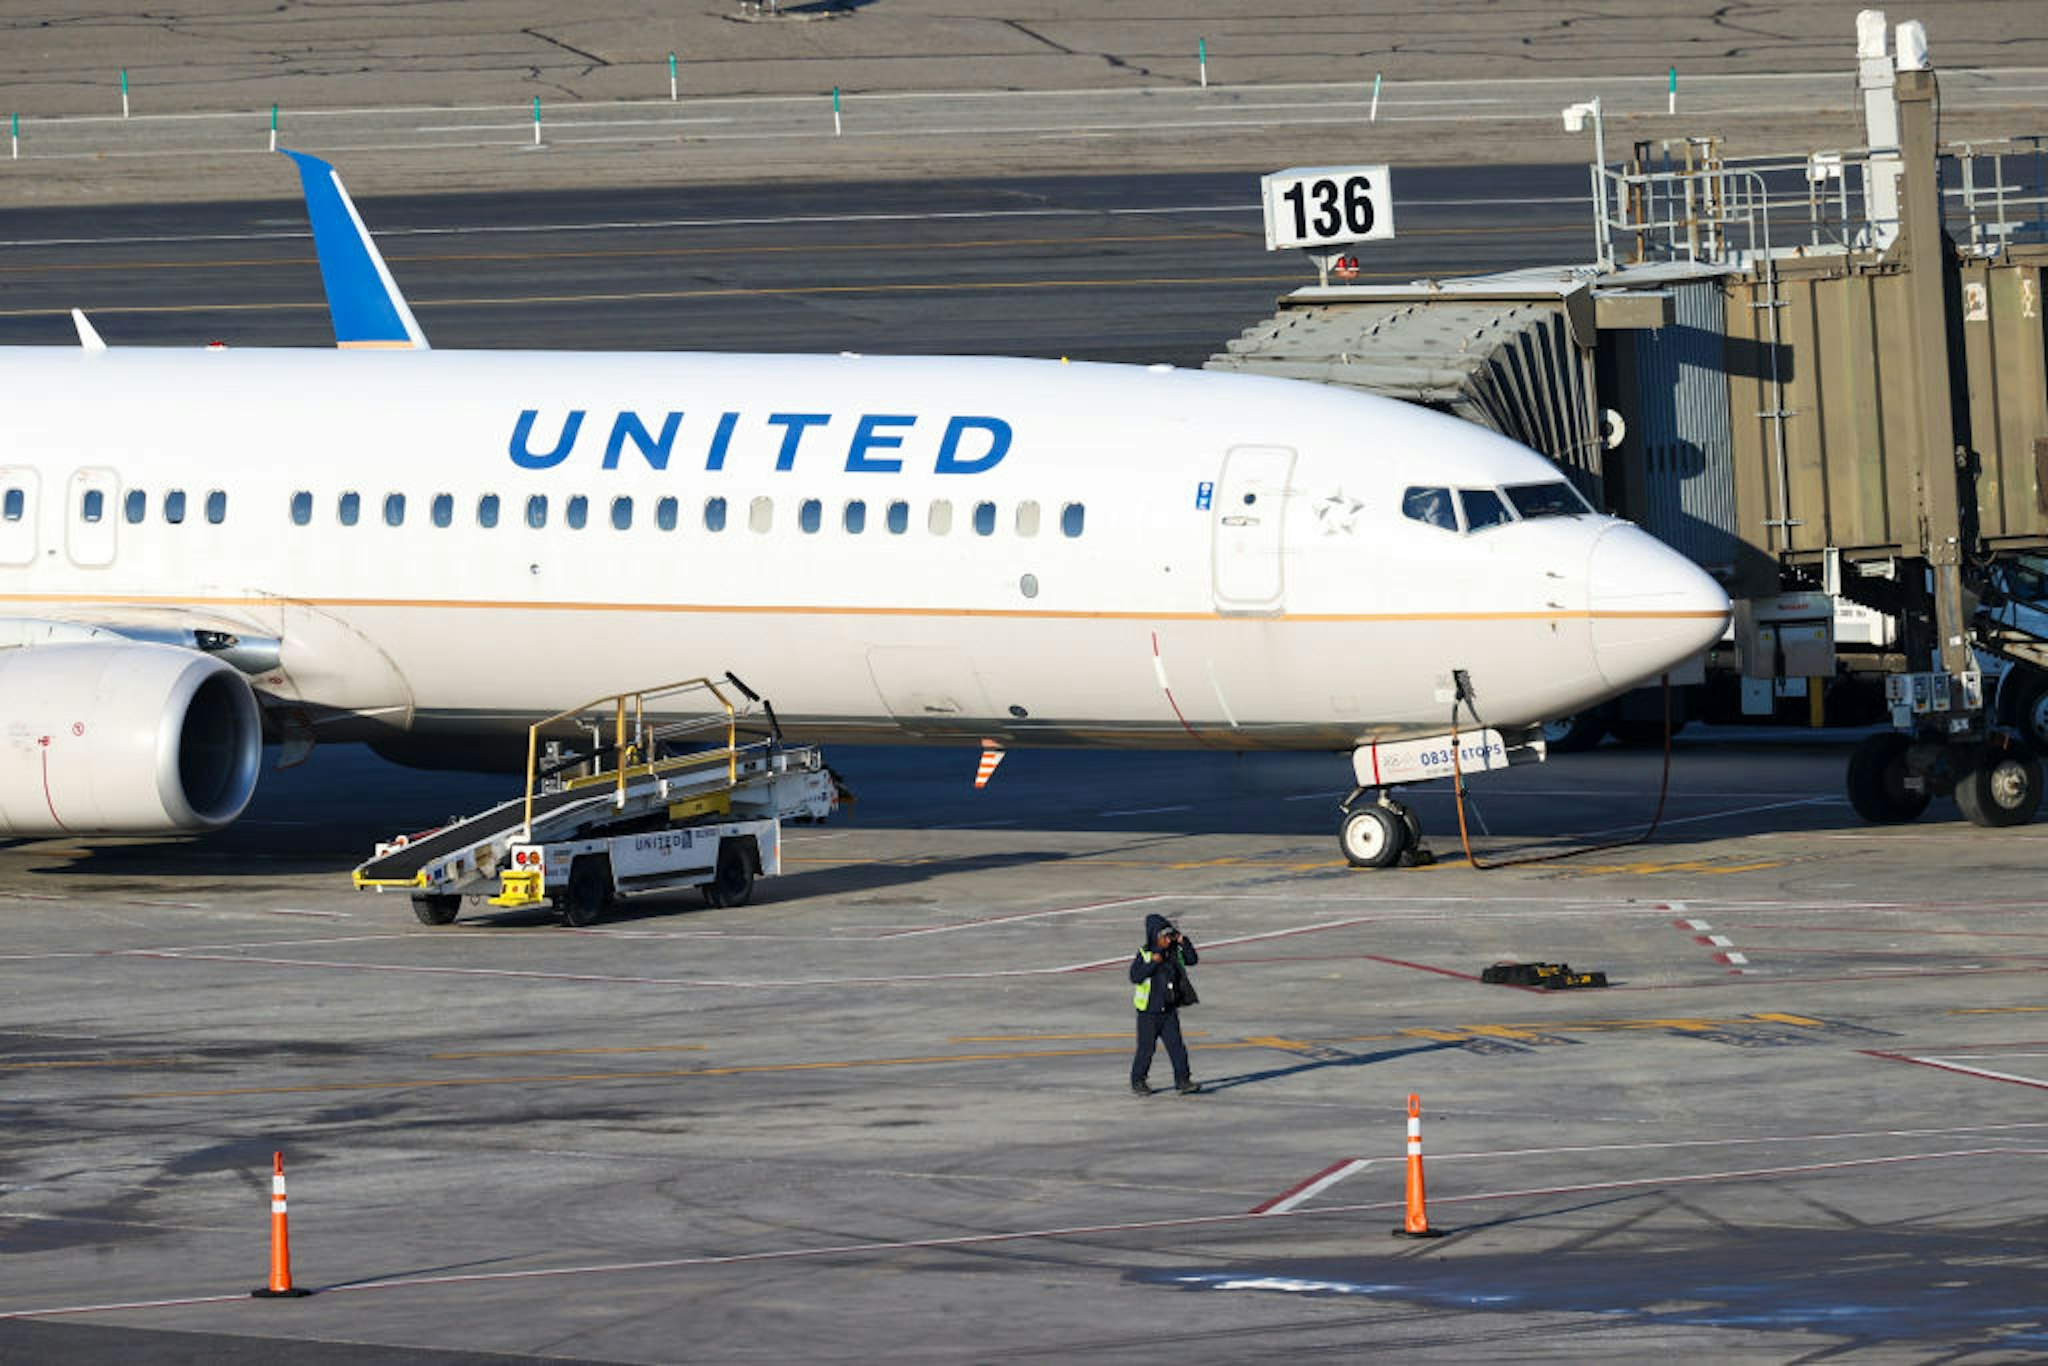 A United Airlines employee was beaten up by a former NFL player at Newark Airport in an incident caught on video.